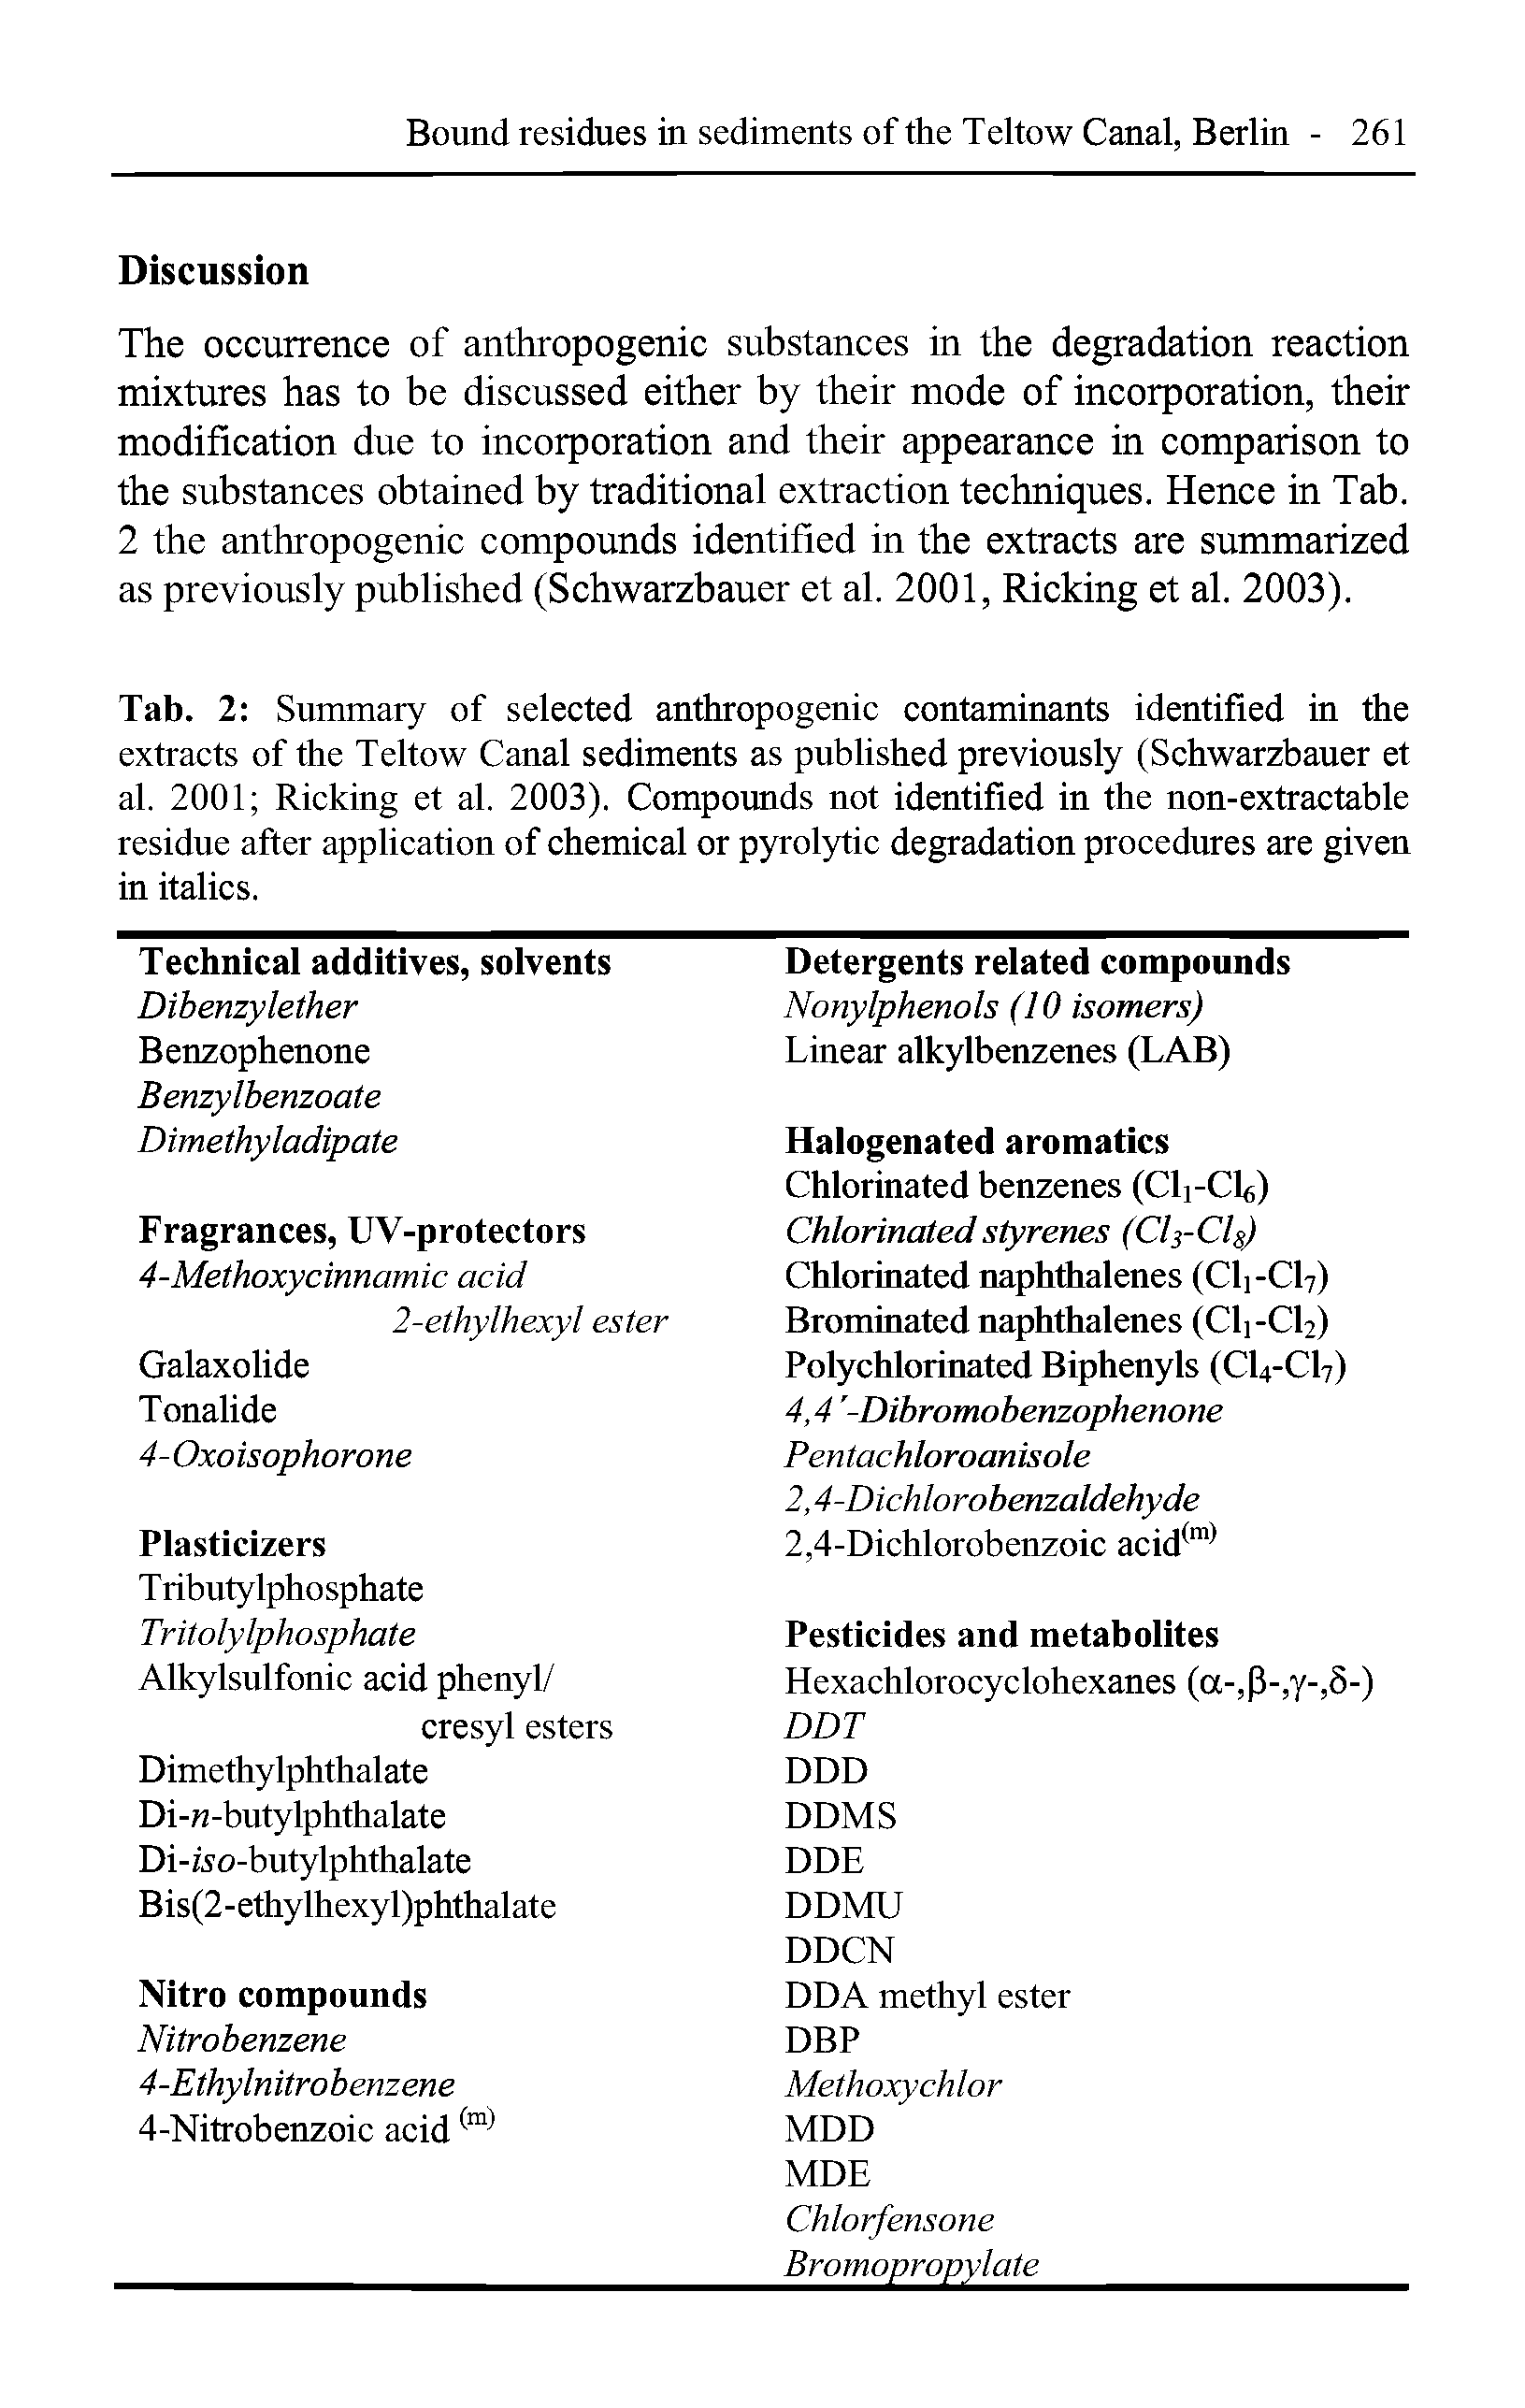 Tab. 2 Summary of selected anthropogenic contaminants identified in the extracts of the Teltow Canal sediments as published previously (Schwarzbauer et al. 2001 Ricking et al. 2003). Compounds not identified in the non-extractable residue after application of chemical or pyrolytic degradation procedures are given in italics.